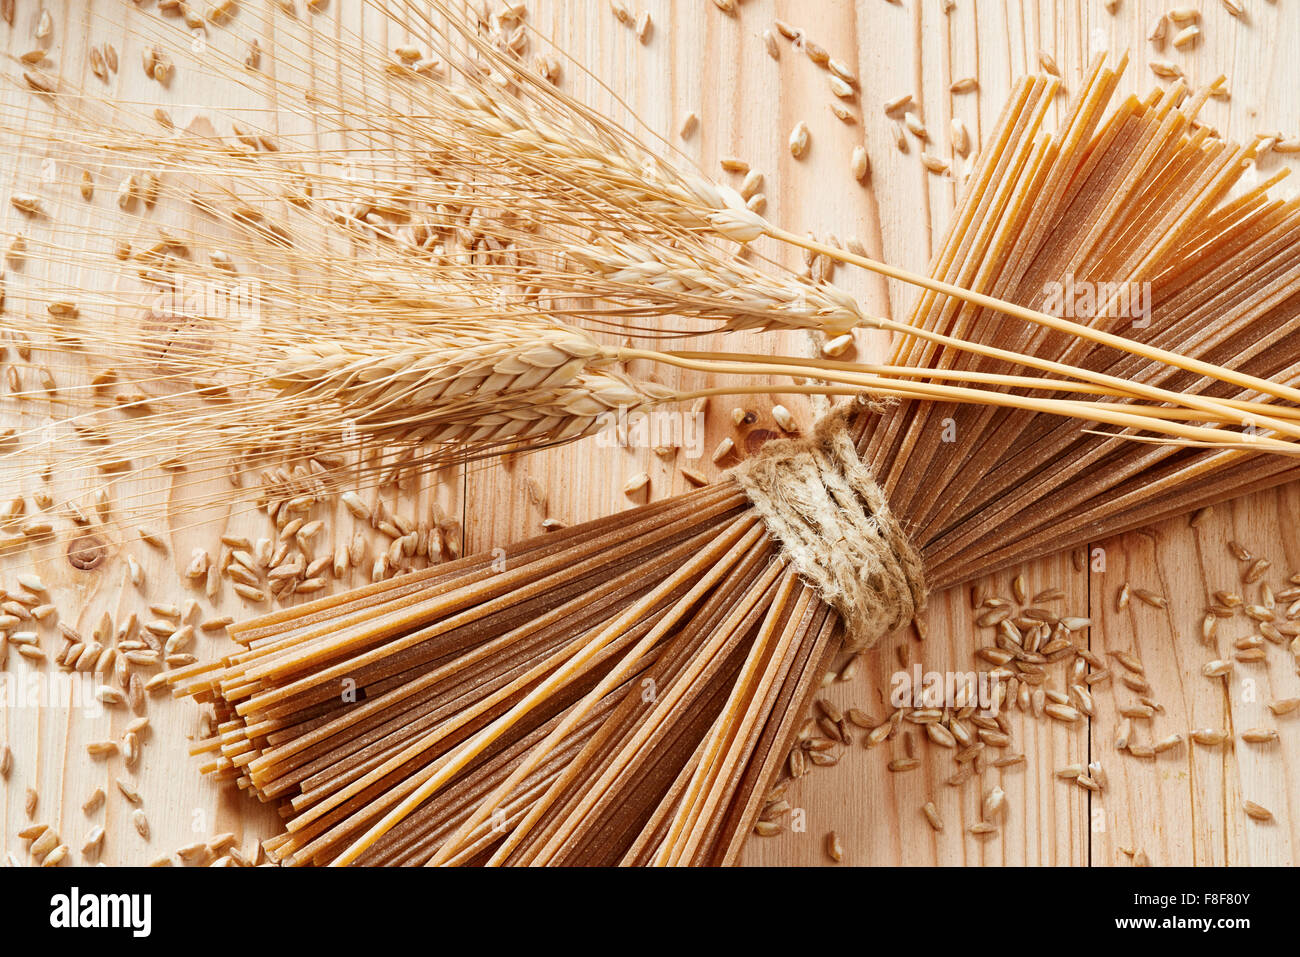 wheat pasta noodles surrounded by whea Stock Photo